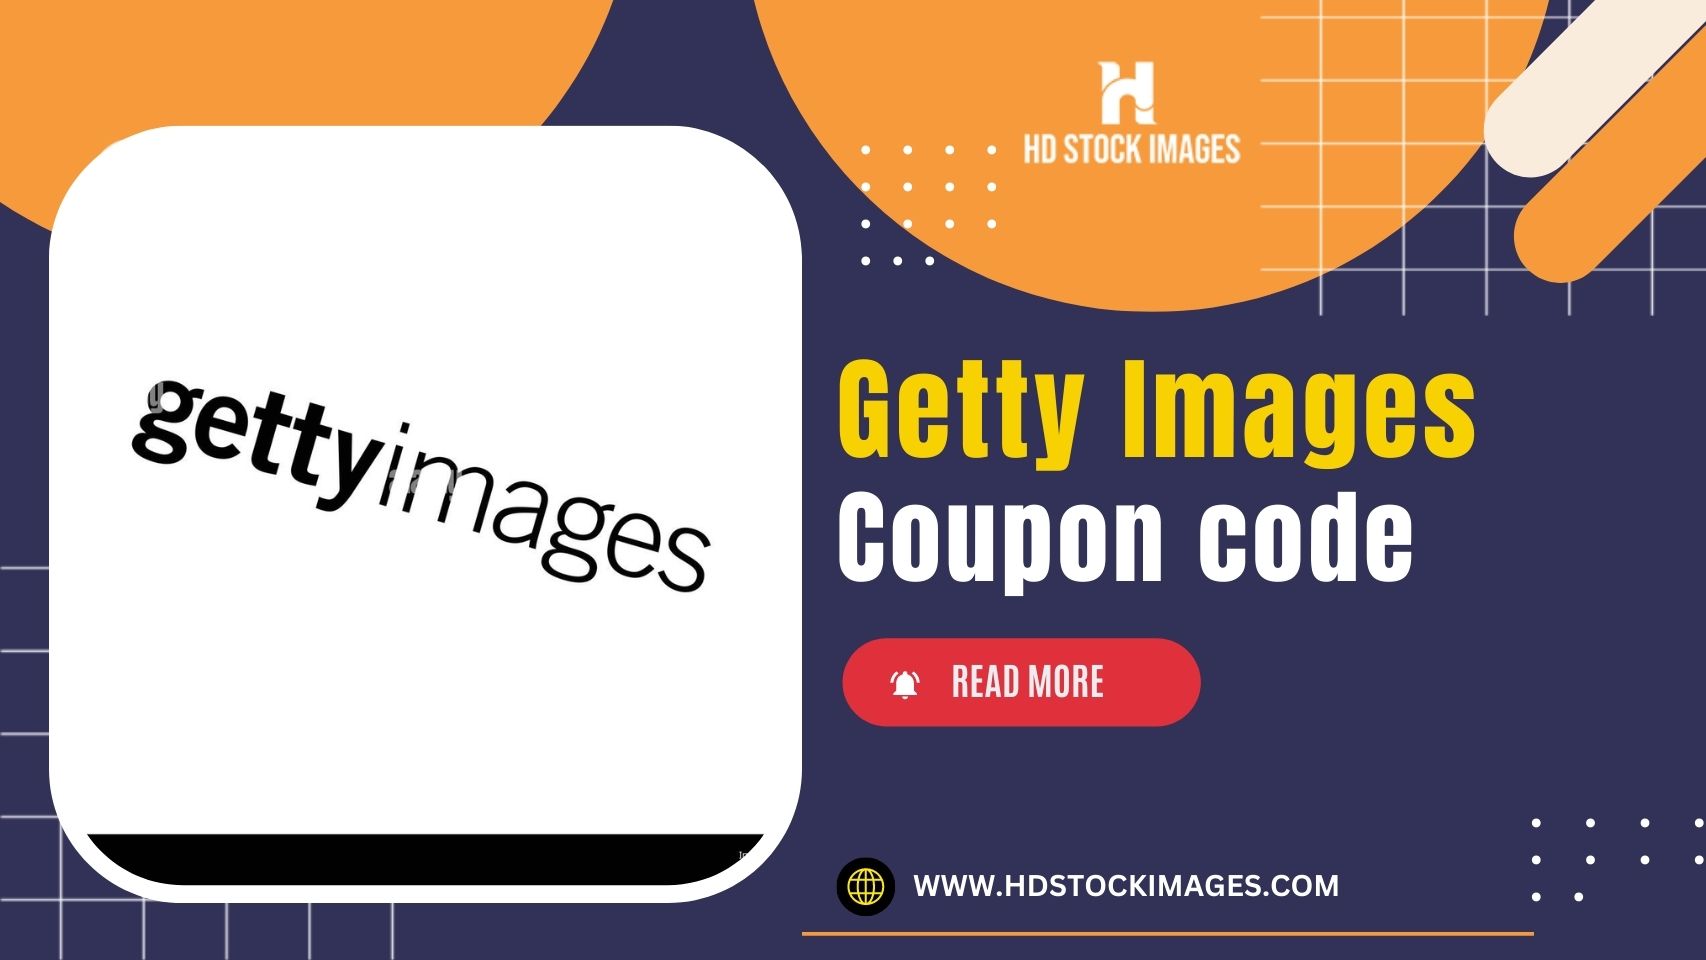 an image of Getty Images Coupon Code: Discounts for Your Stock Image Purchases